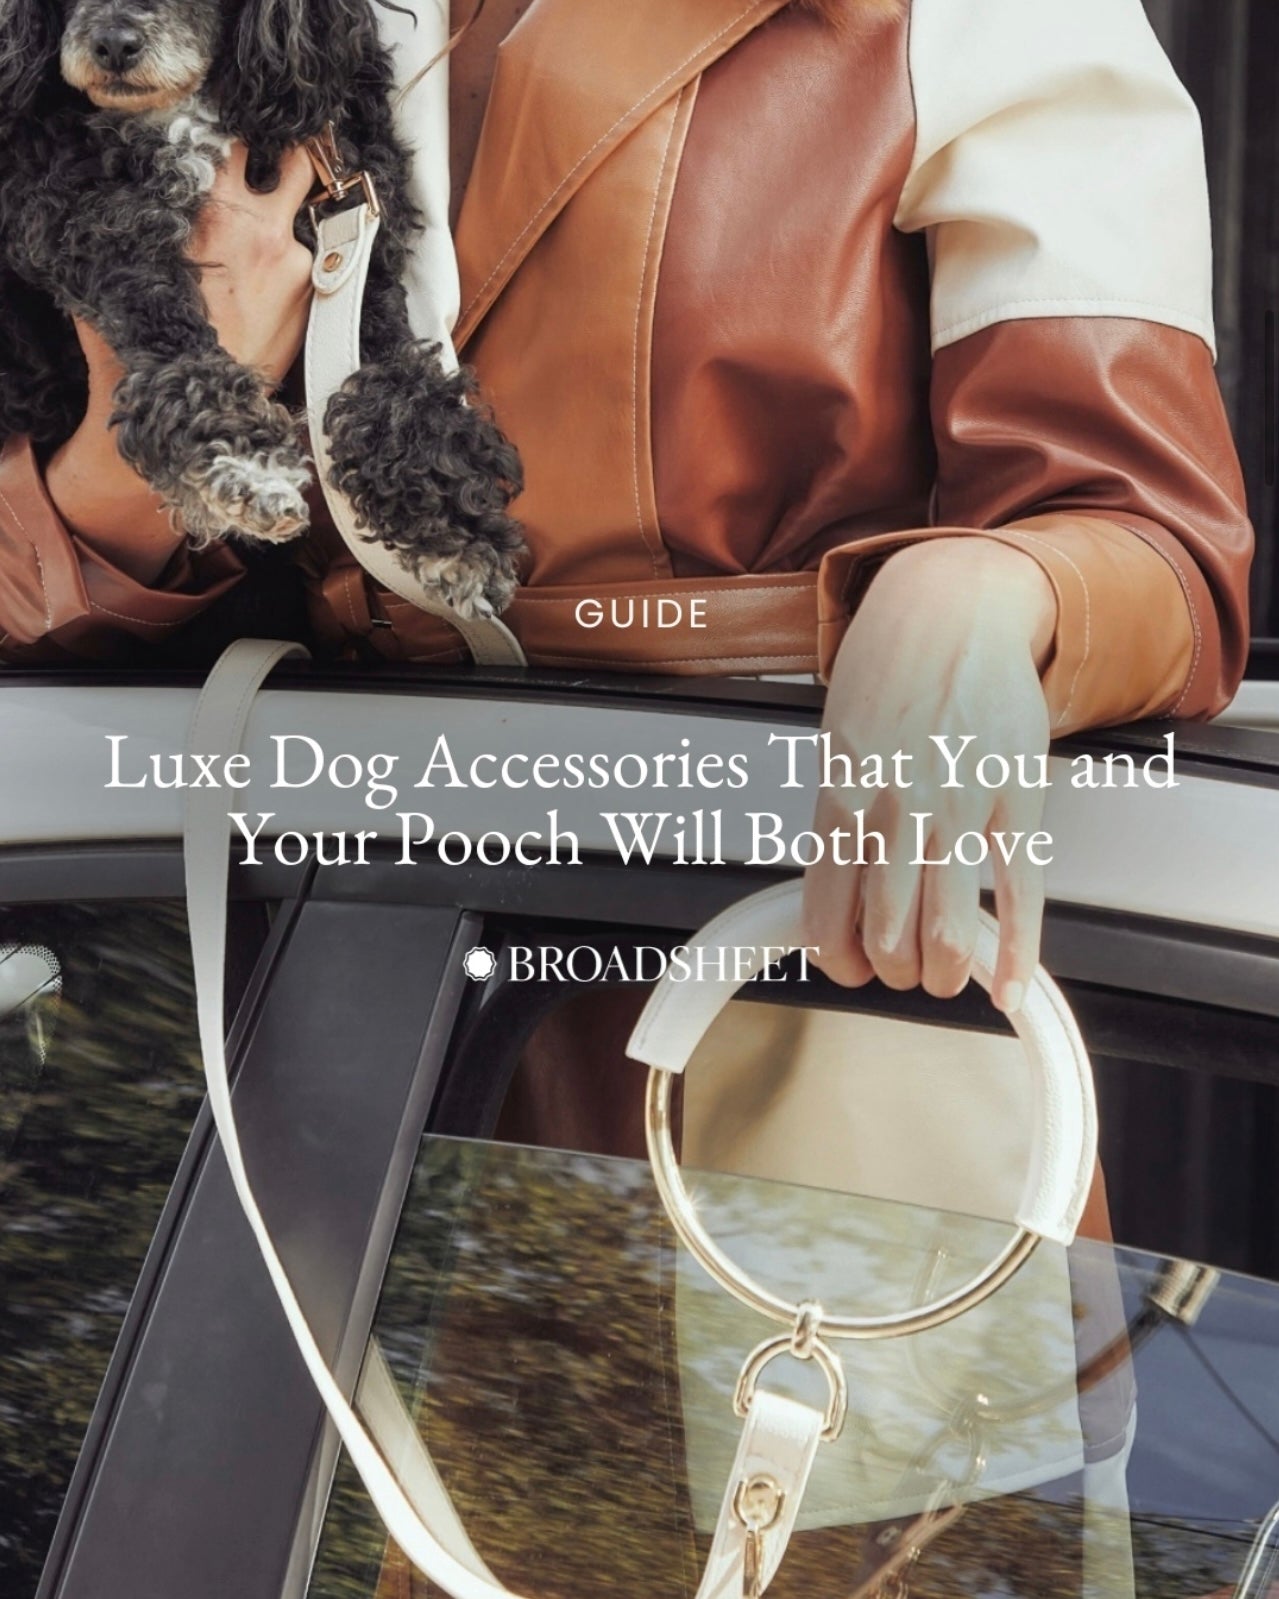 Bourke St the Label - Broadsheet Guide Luxe Dog Accessories